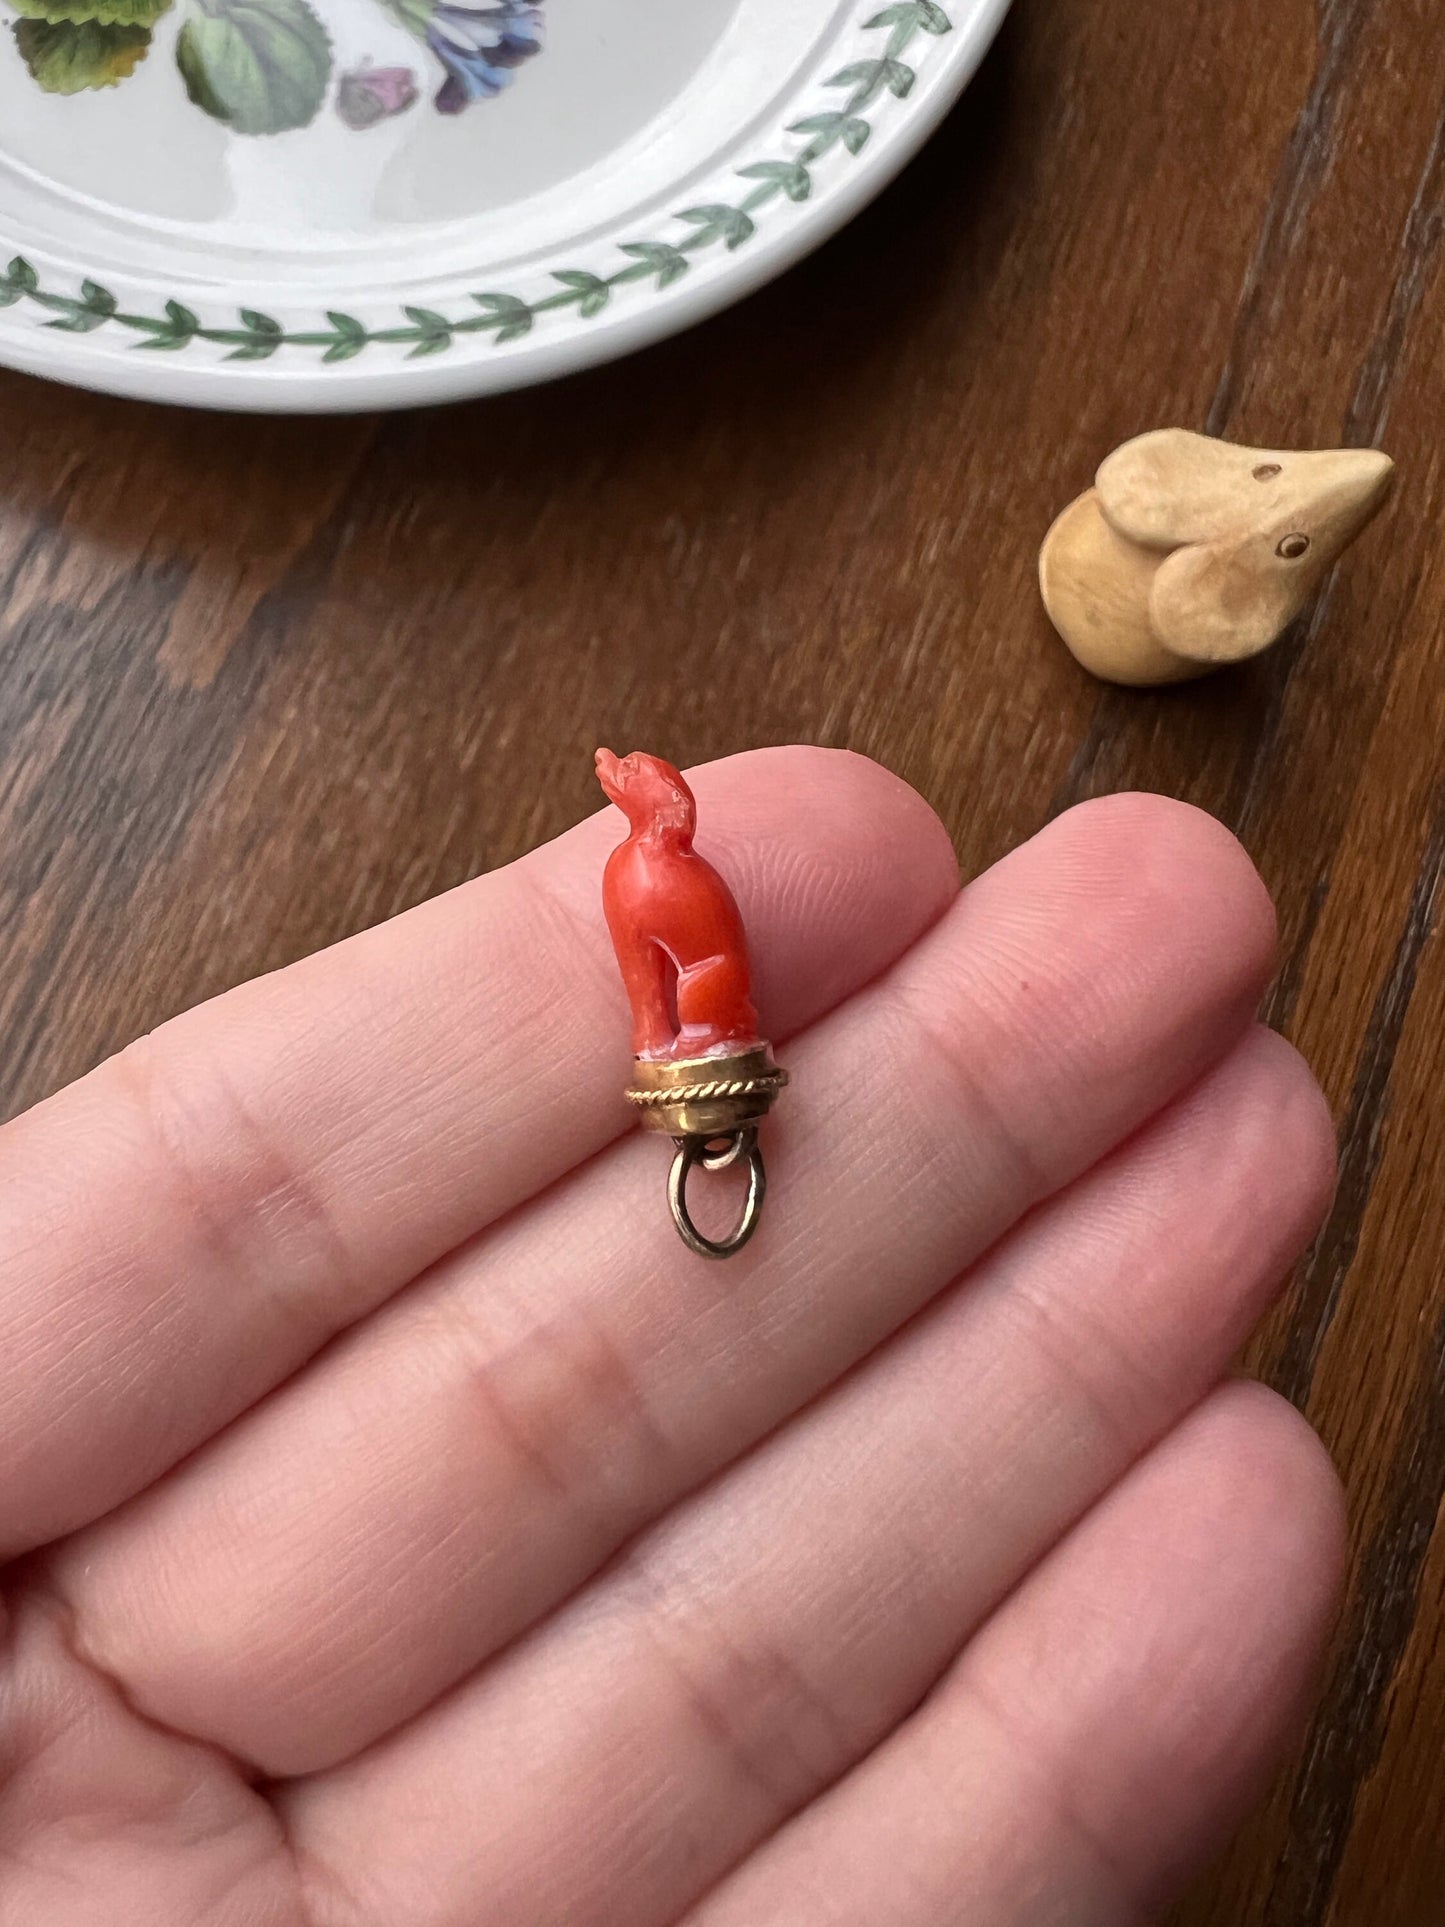 DOG Teeny Tiny French Antique Coral Charm Pendant Victorian 18k Gold Salmon Orange Faithful Hunting Hound Oaak Gift One of a Kind Figural